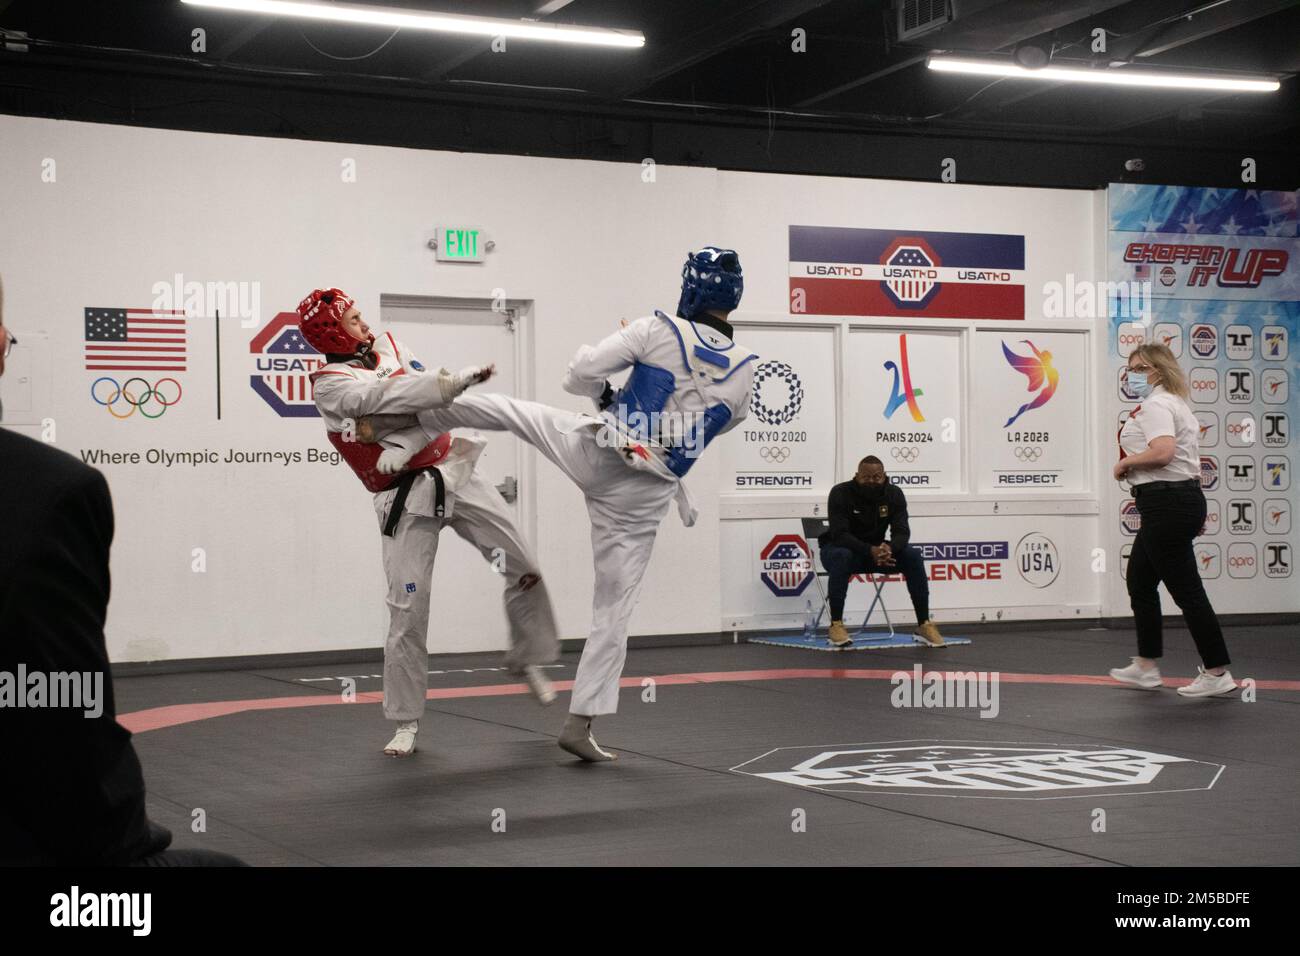 Spc. Josh Liu competes at the Collegiate Team Trials to compete for a spot at the 31st Summer World University Games, Chengdu, China during a competition at the USA Taekwondo National Center of Excellence, February 26-27, 2022. Liu defeated both opponents and qualified for the games during the competition. Stock Photo